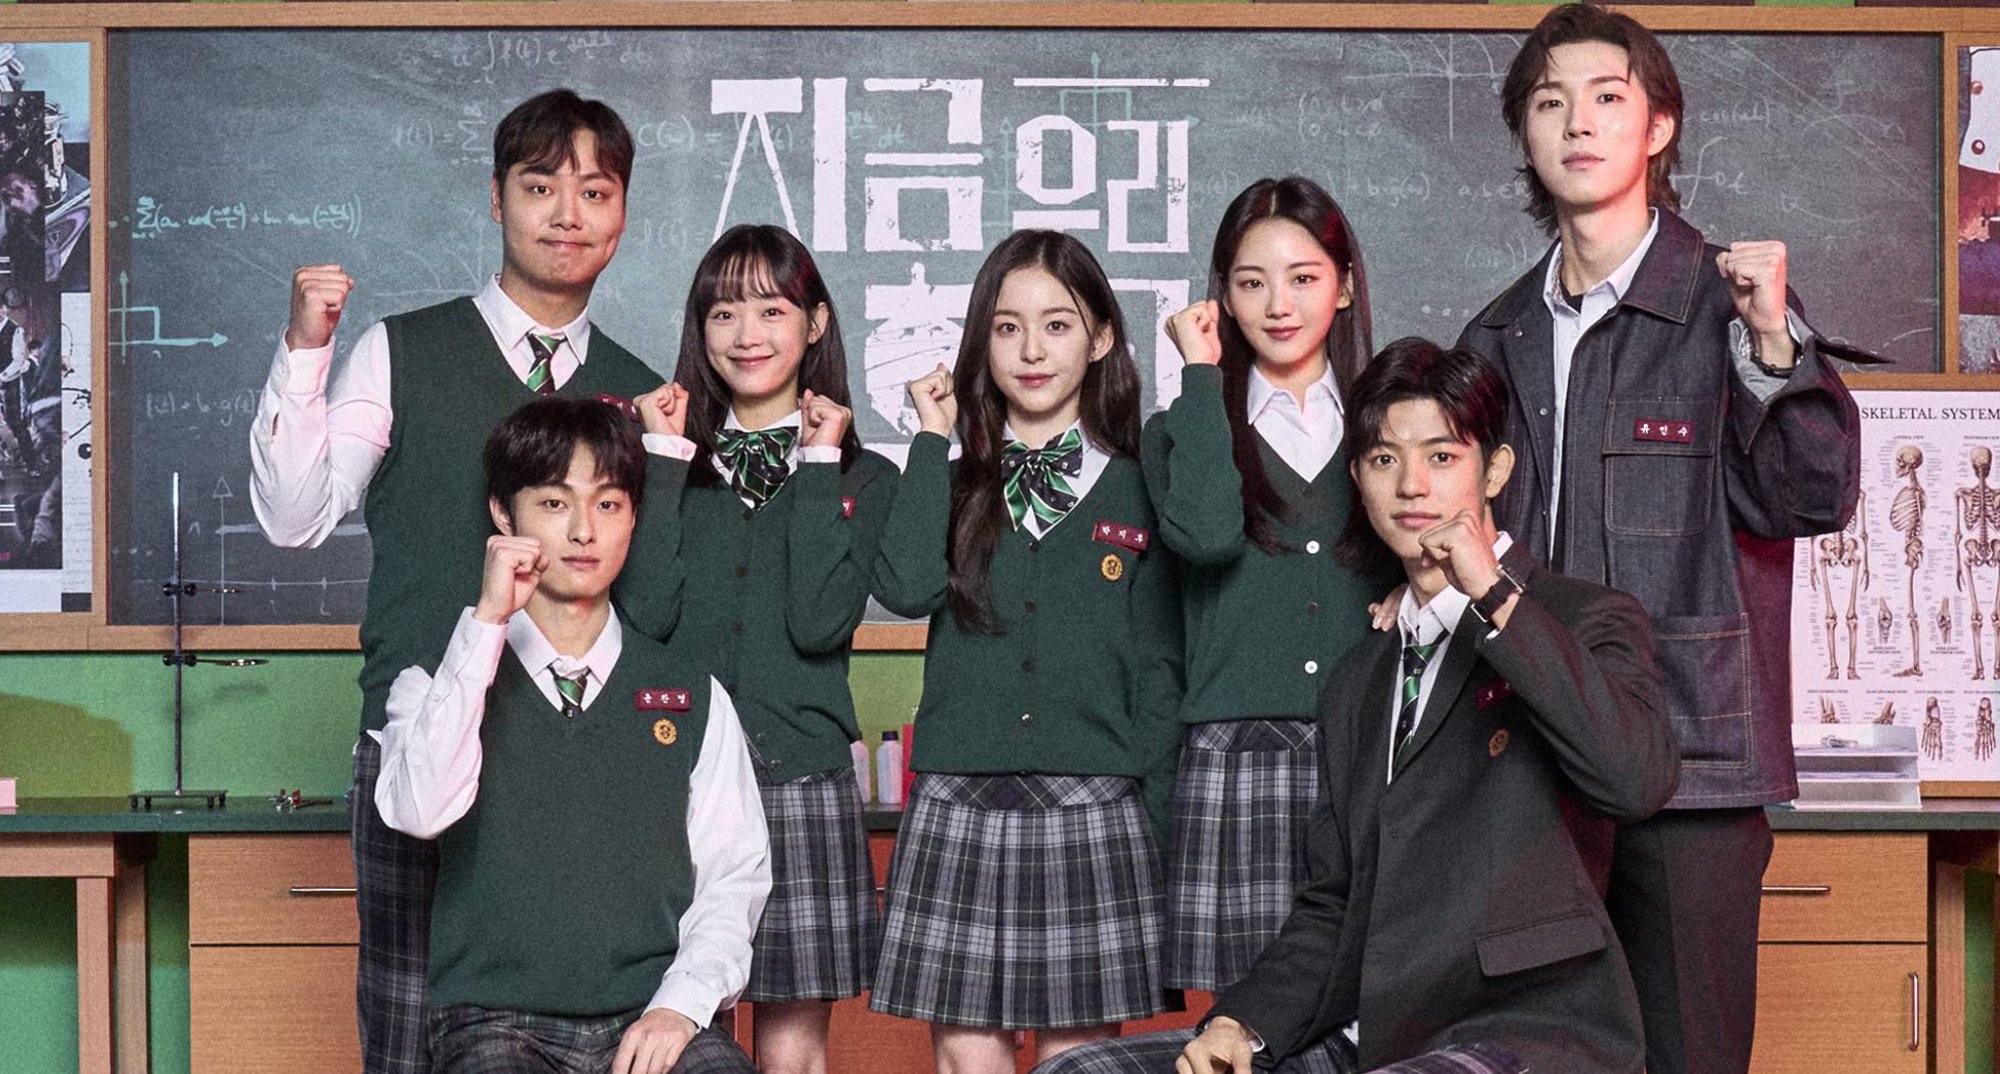 The main cast of 'All of Us Are Dead' in relation for Season 2 wearing school uniforms.